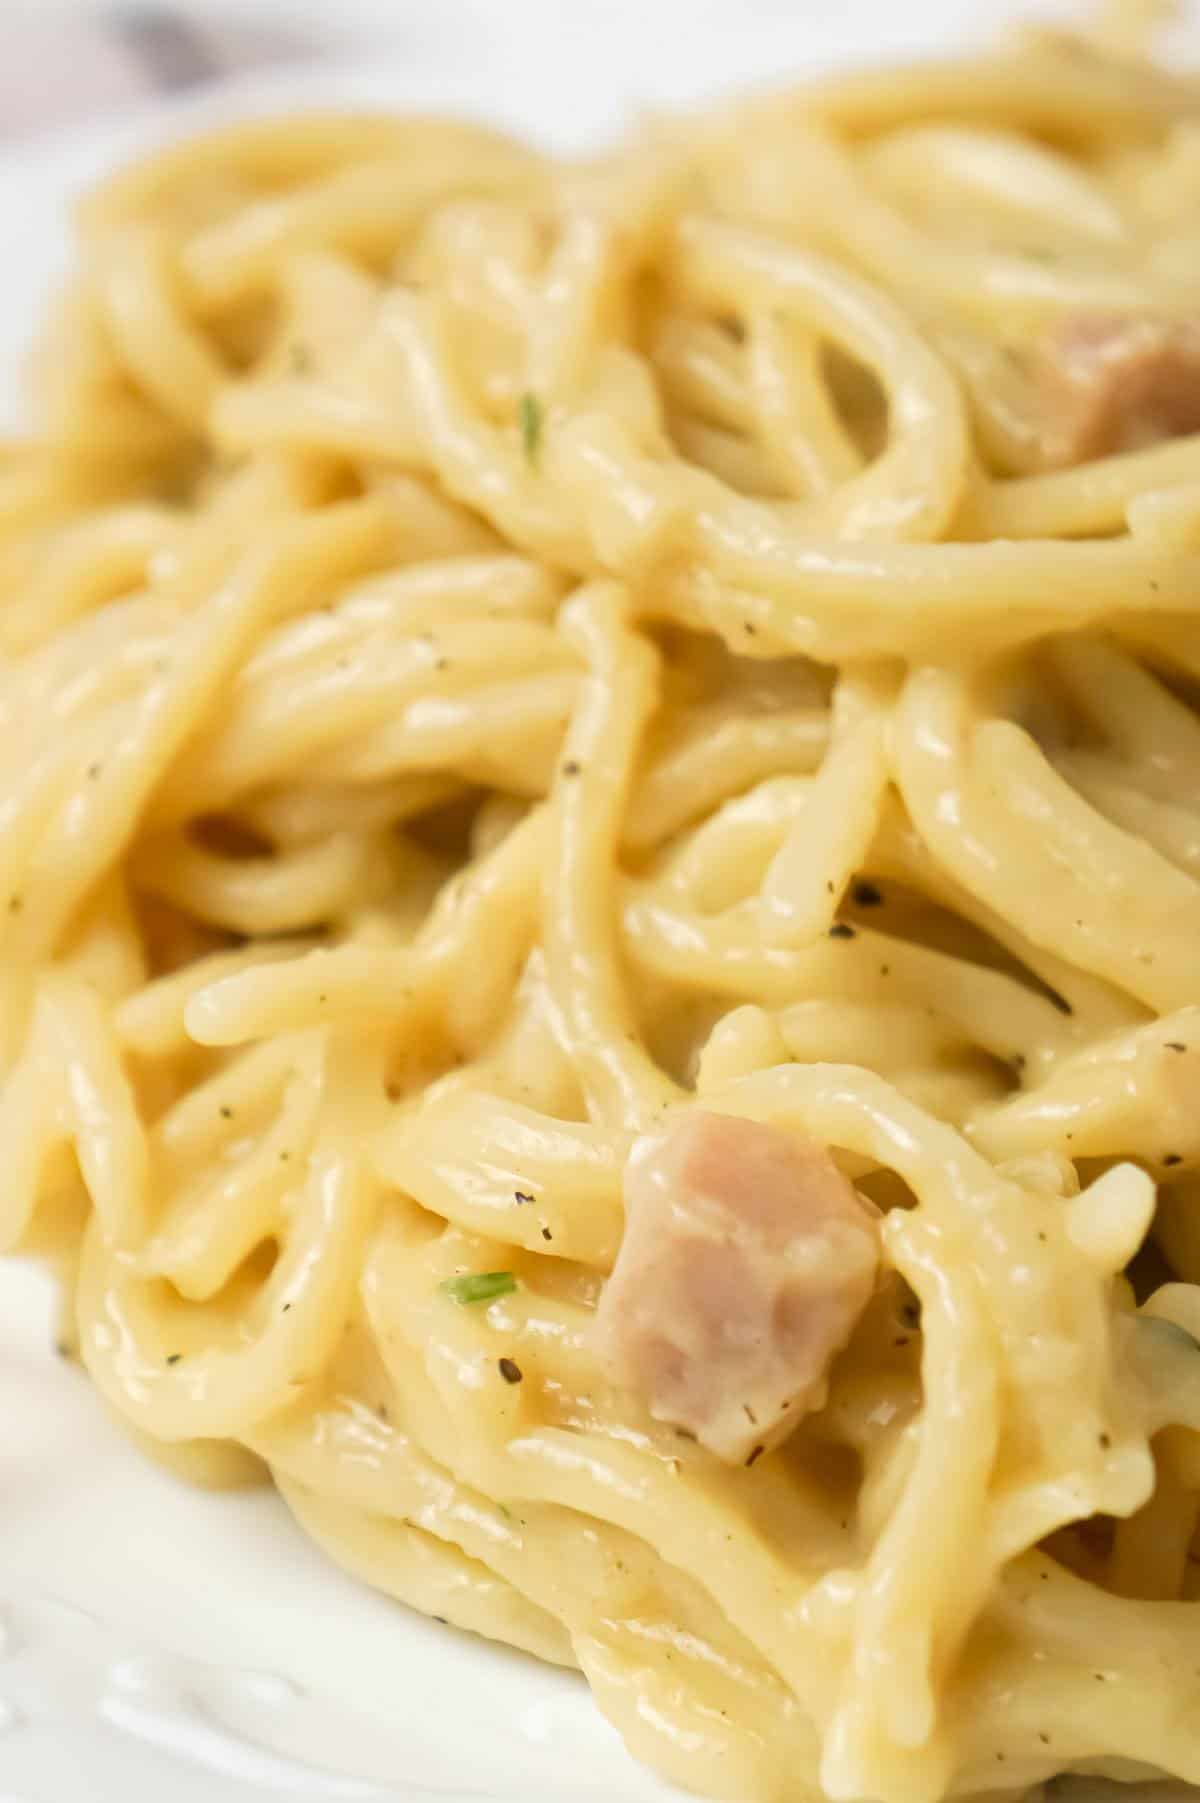 One Pot Chicken Spaghetti is a simple dinner recipe using only spaghetti, thick cream of chicken soup, and seasonings.